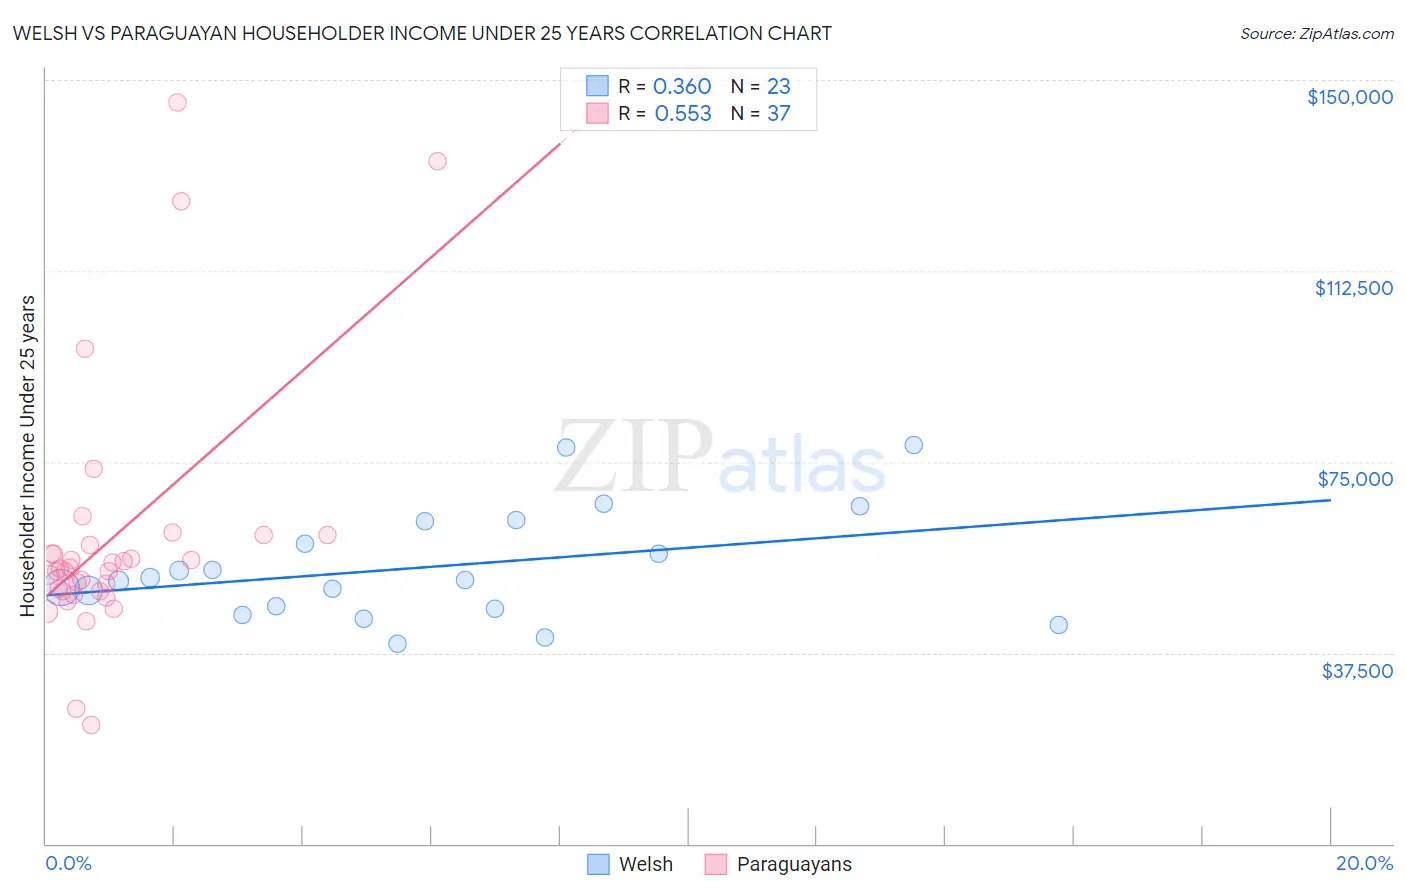 Welsh vs Paraguayan Householder Income Under 25 years